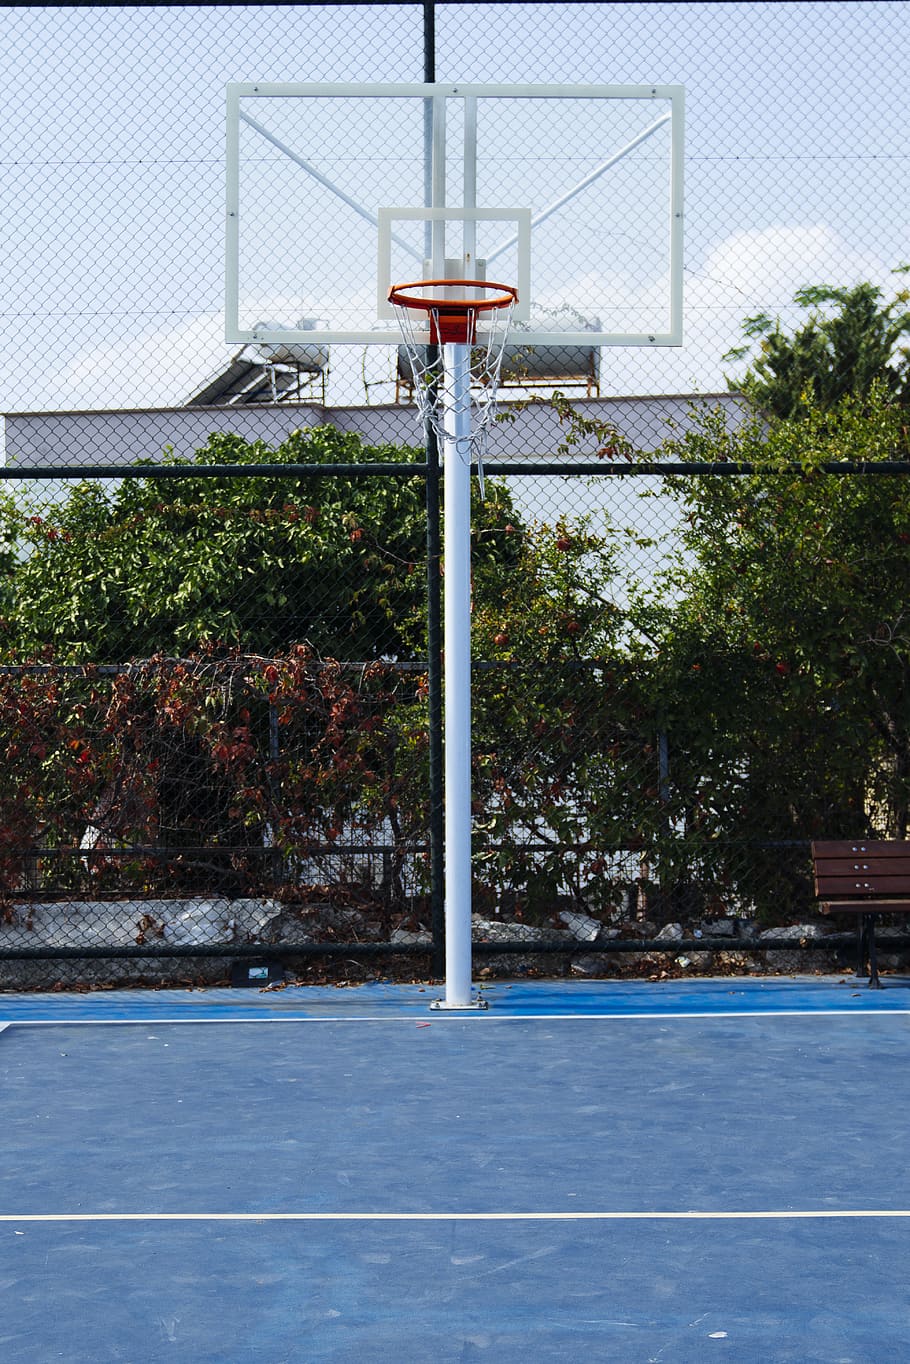 empty basketball court during daytime, human, person, people